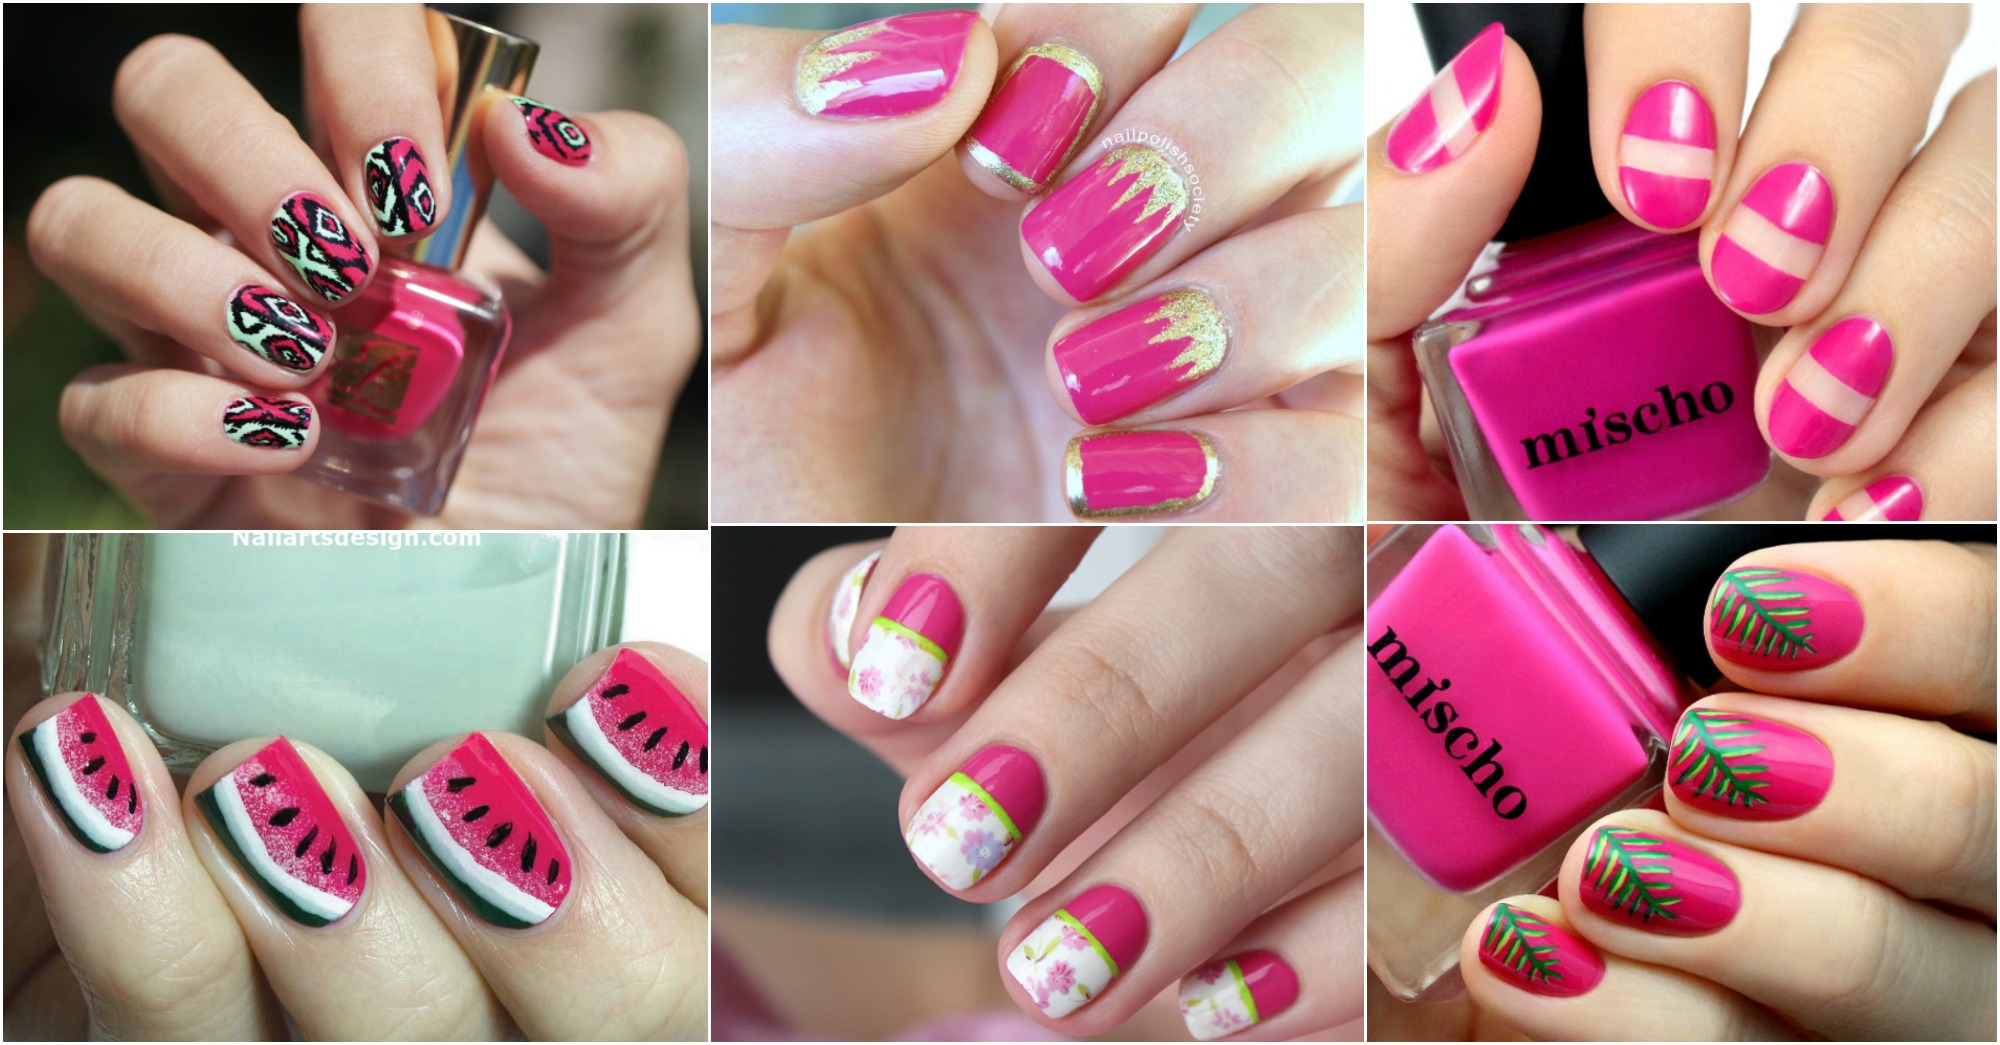 16 Hot Pink Nail Designs You Can Copy This Summer - fashionsy.com